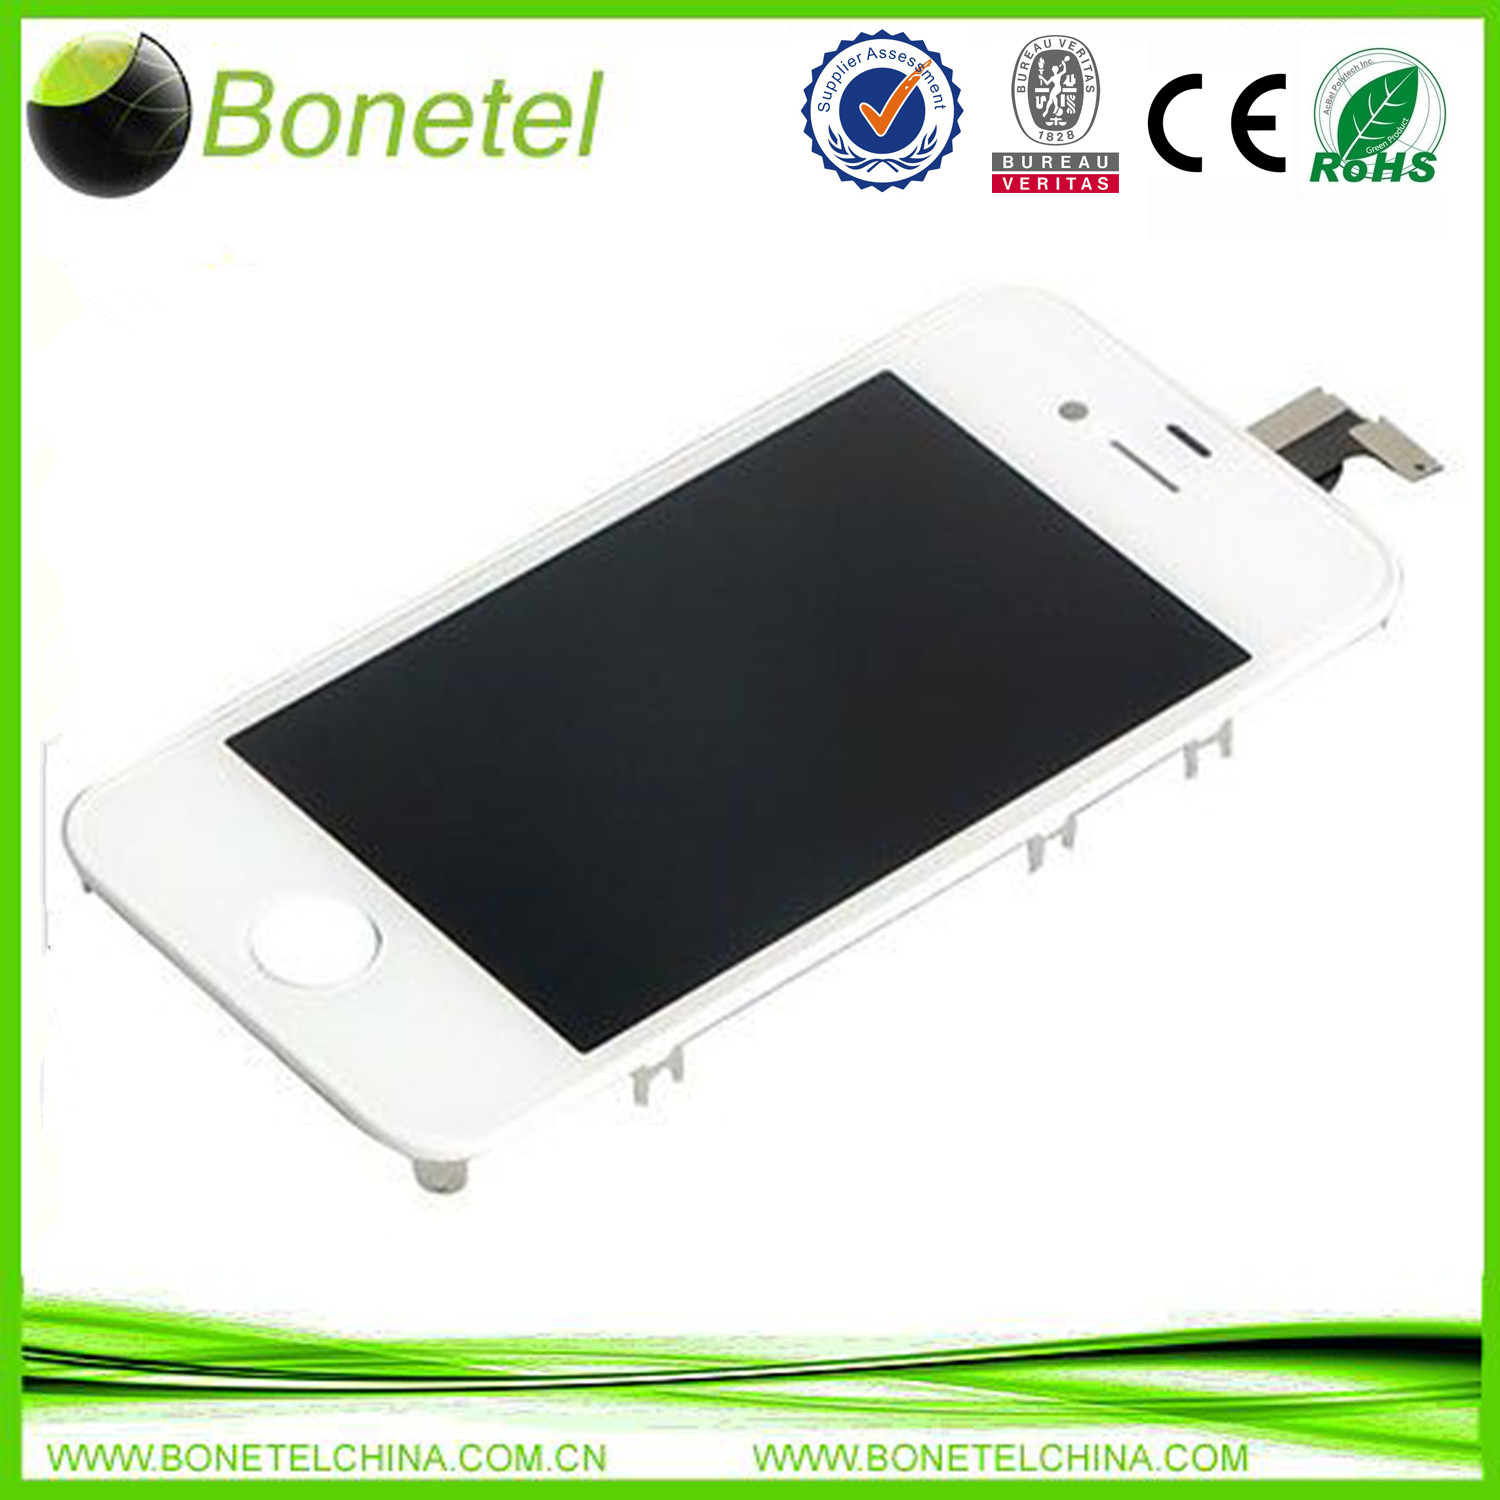 New White Touch Screen Digitizer LCD Display Assembly For iPhone 4S 4GS